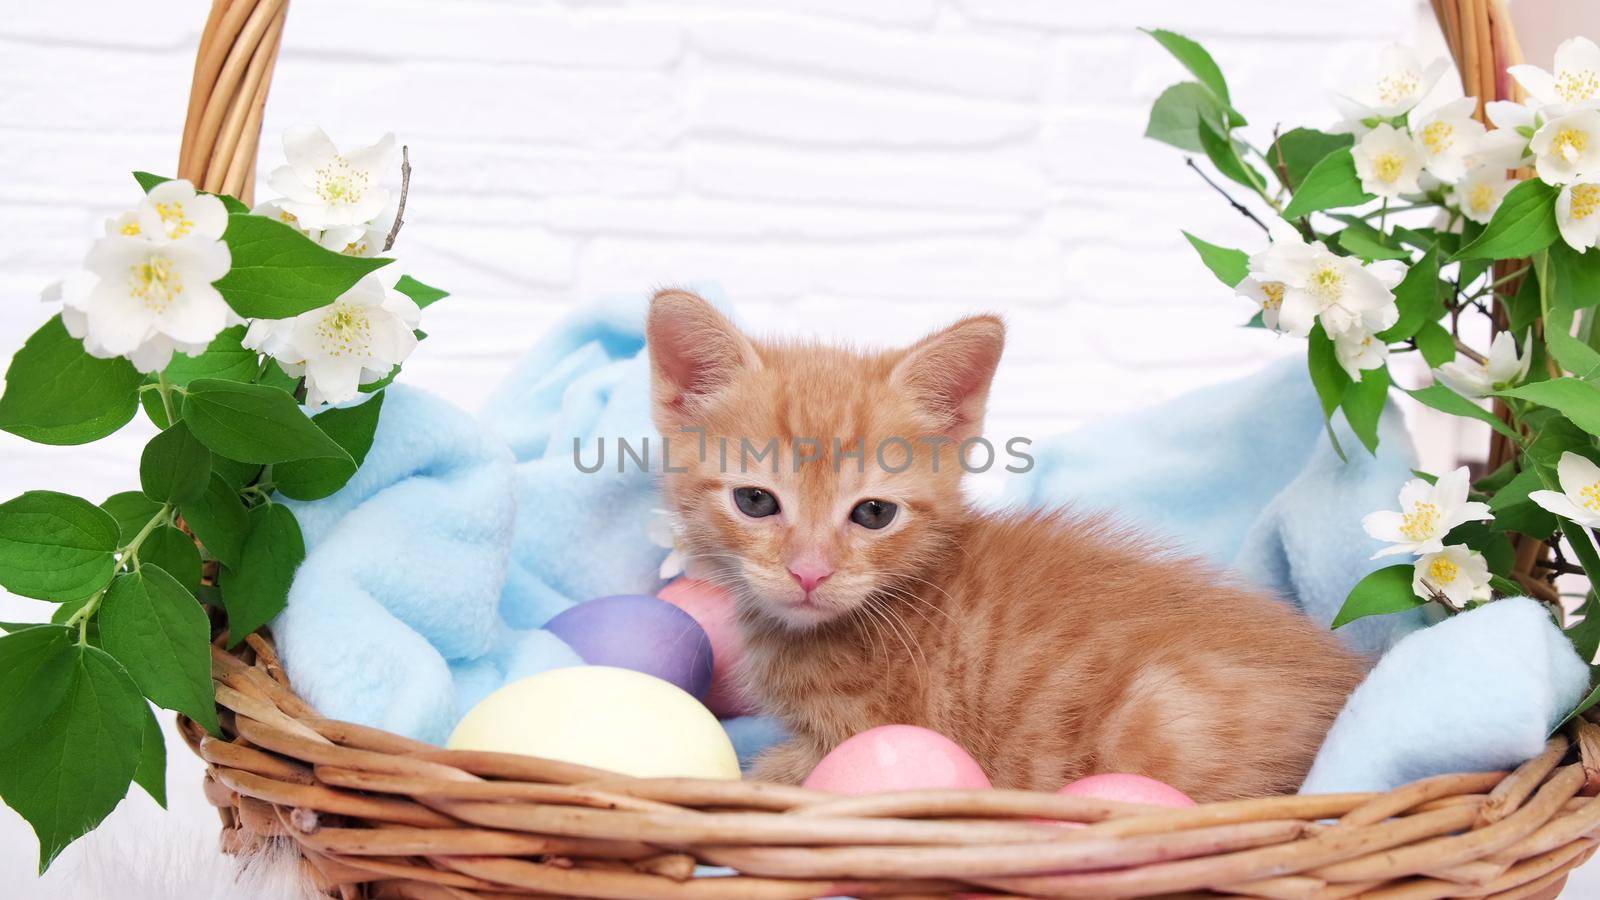 A small red tabby kitten lies comfortably in a blue blanket and looks around with easters eggs. Concept of taking care of pets, spring holidays, Easter by chelmicky